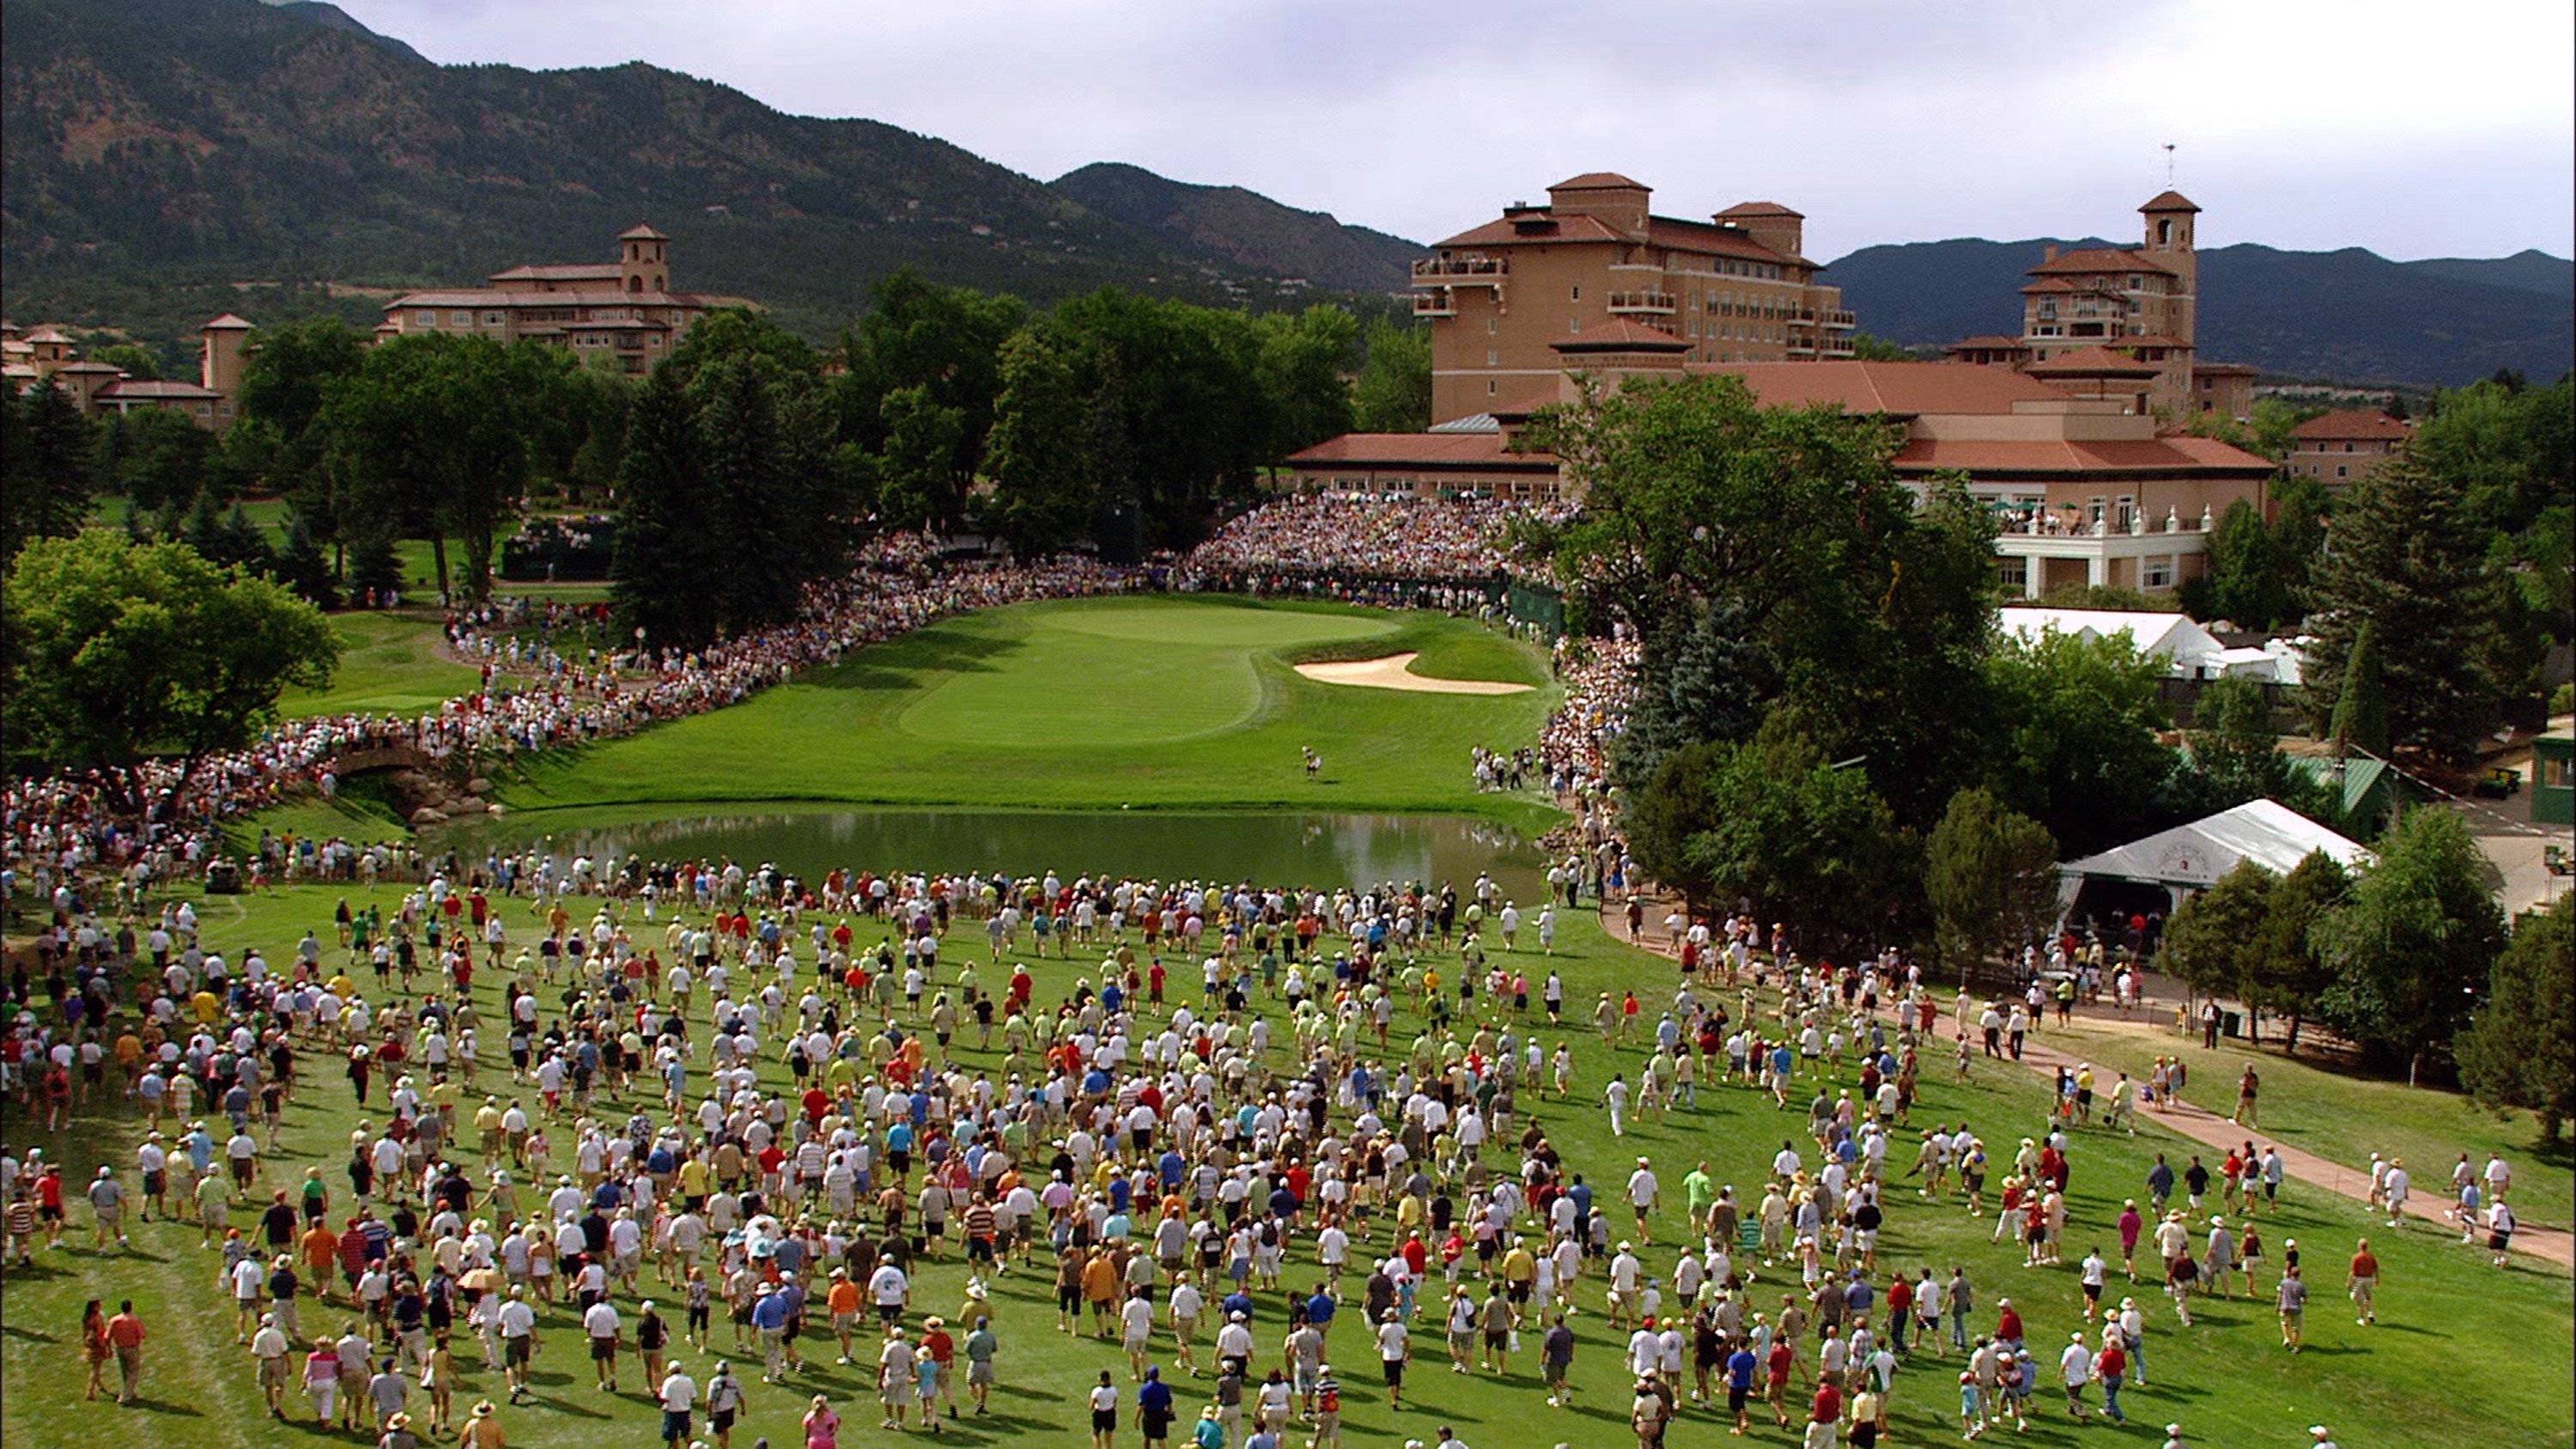 39th U.S. Senior Open at The Broadmoor 100 Day Countdown Begins